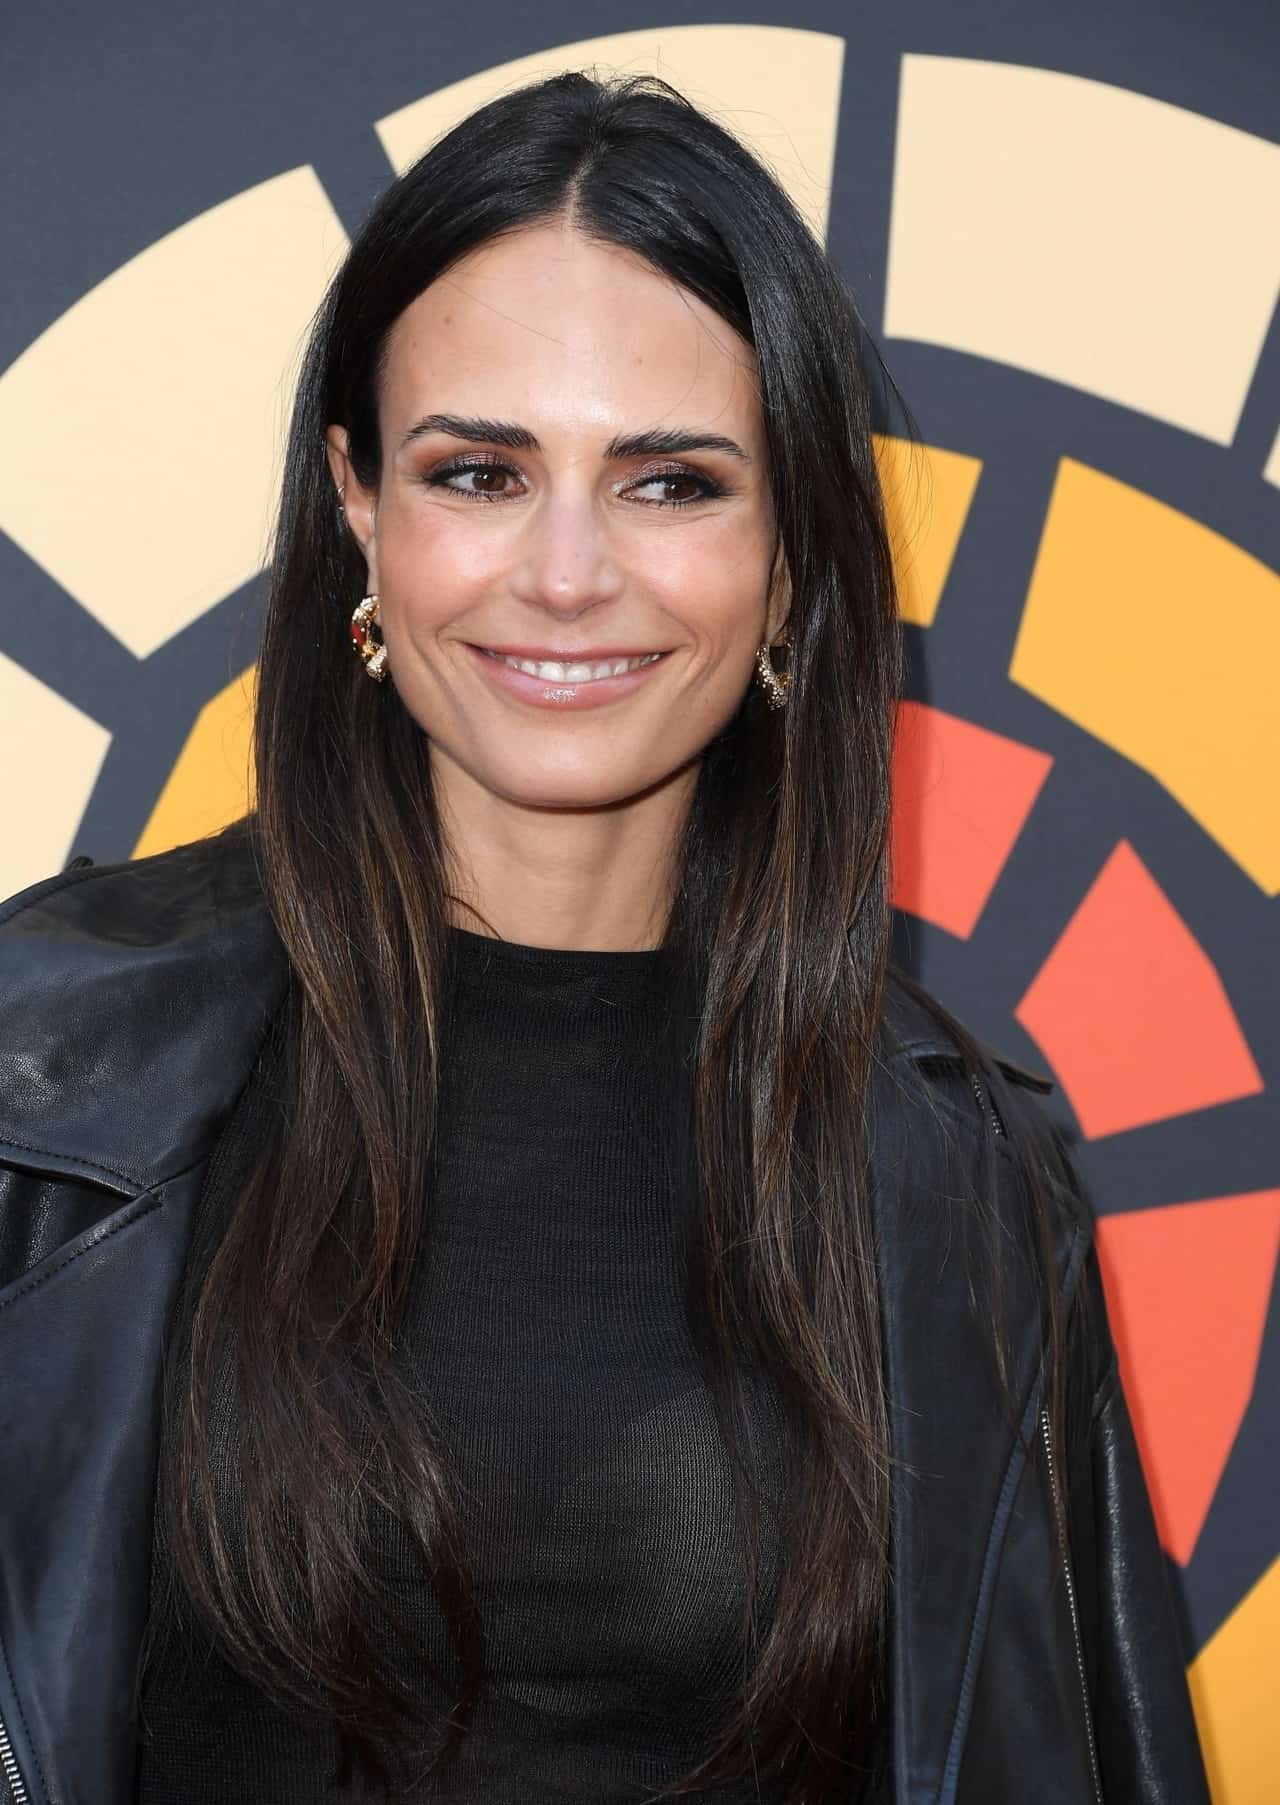 Jordana Brewster Amazes in a Sheer Crop Top at CTAOP’s 2023 Party